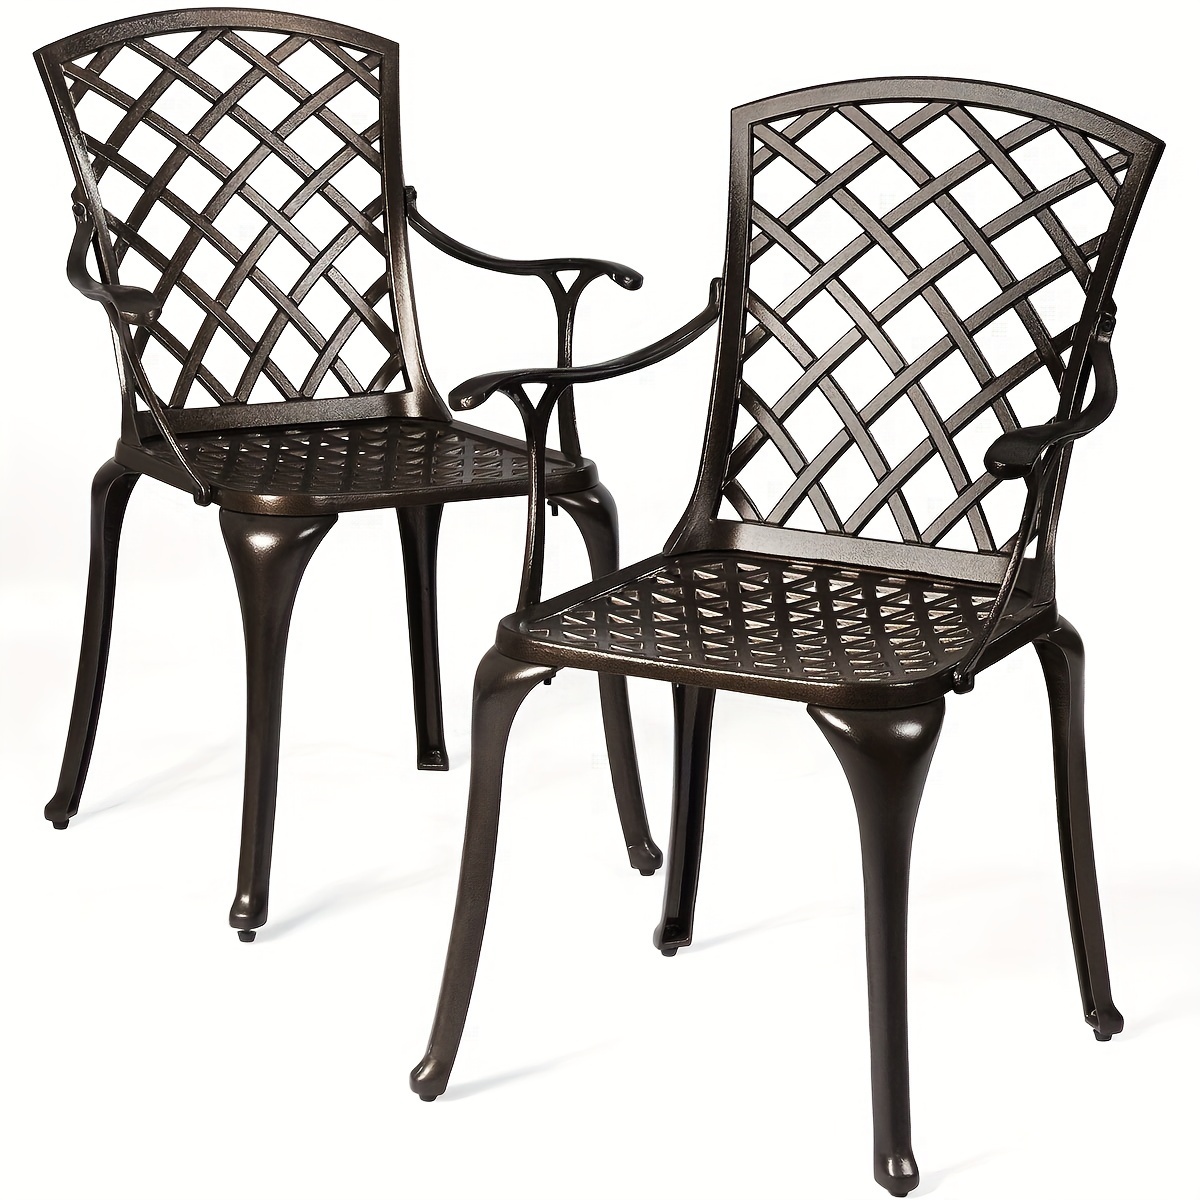 

Giantex Aluminum Arm Dining Chairs Set Of 2, Durable Indoor Outdoor Patio Bistro Chair, Cast Arm Dining Chair For Garden Backyard